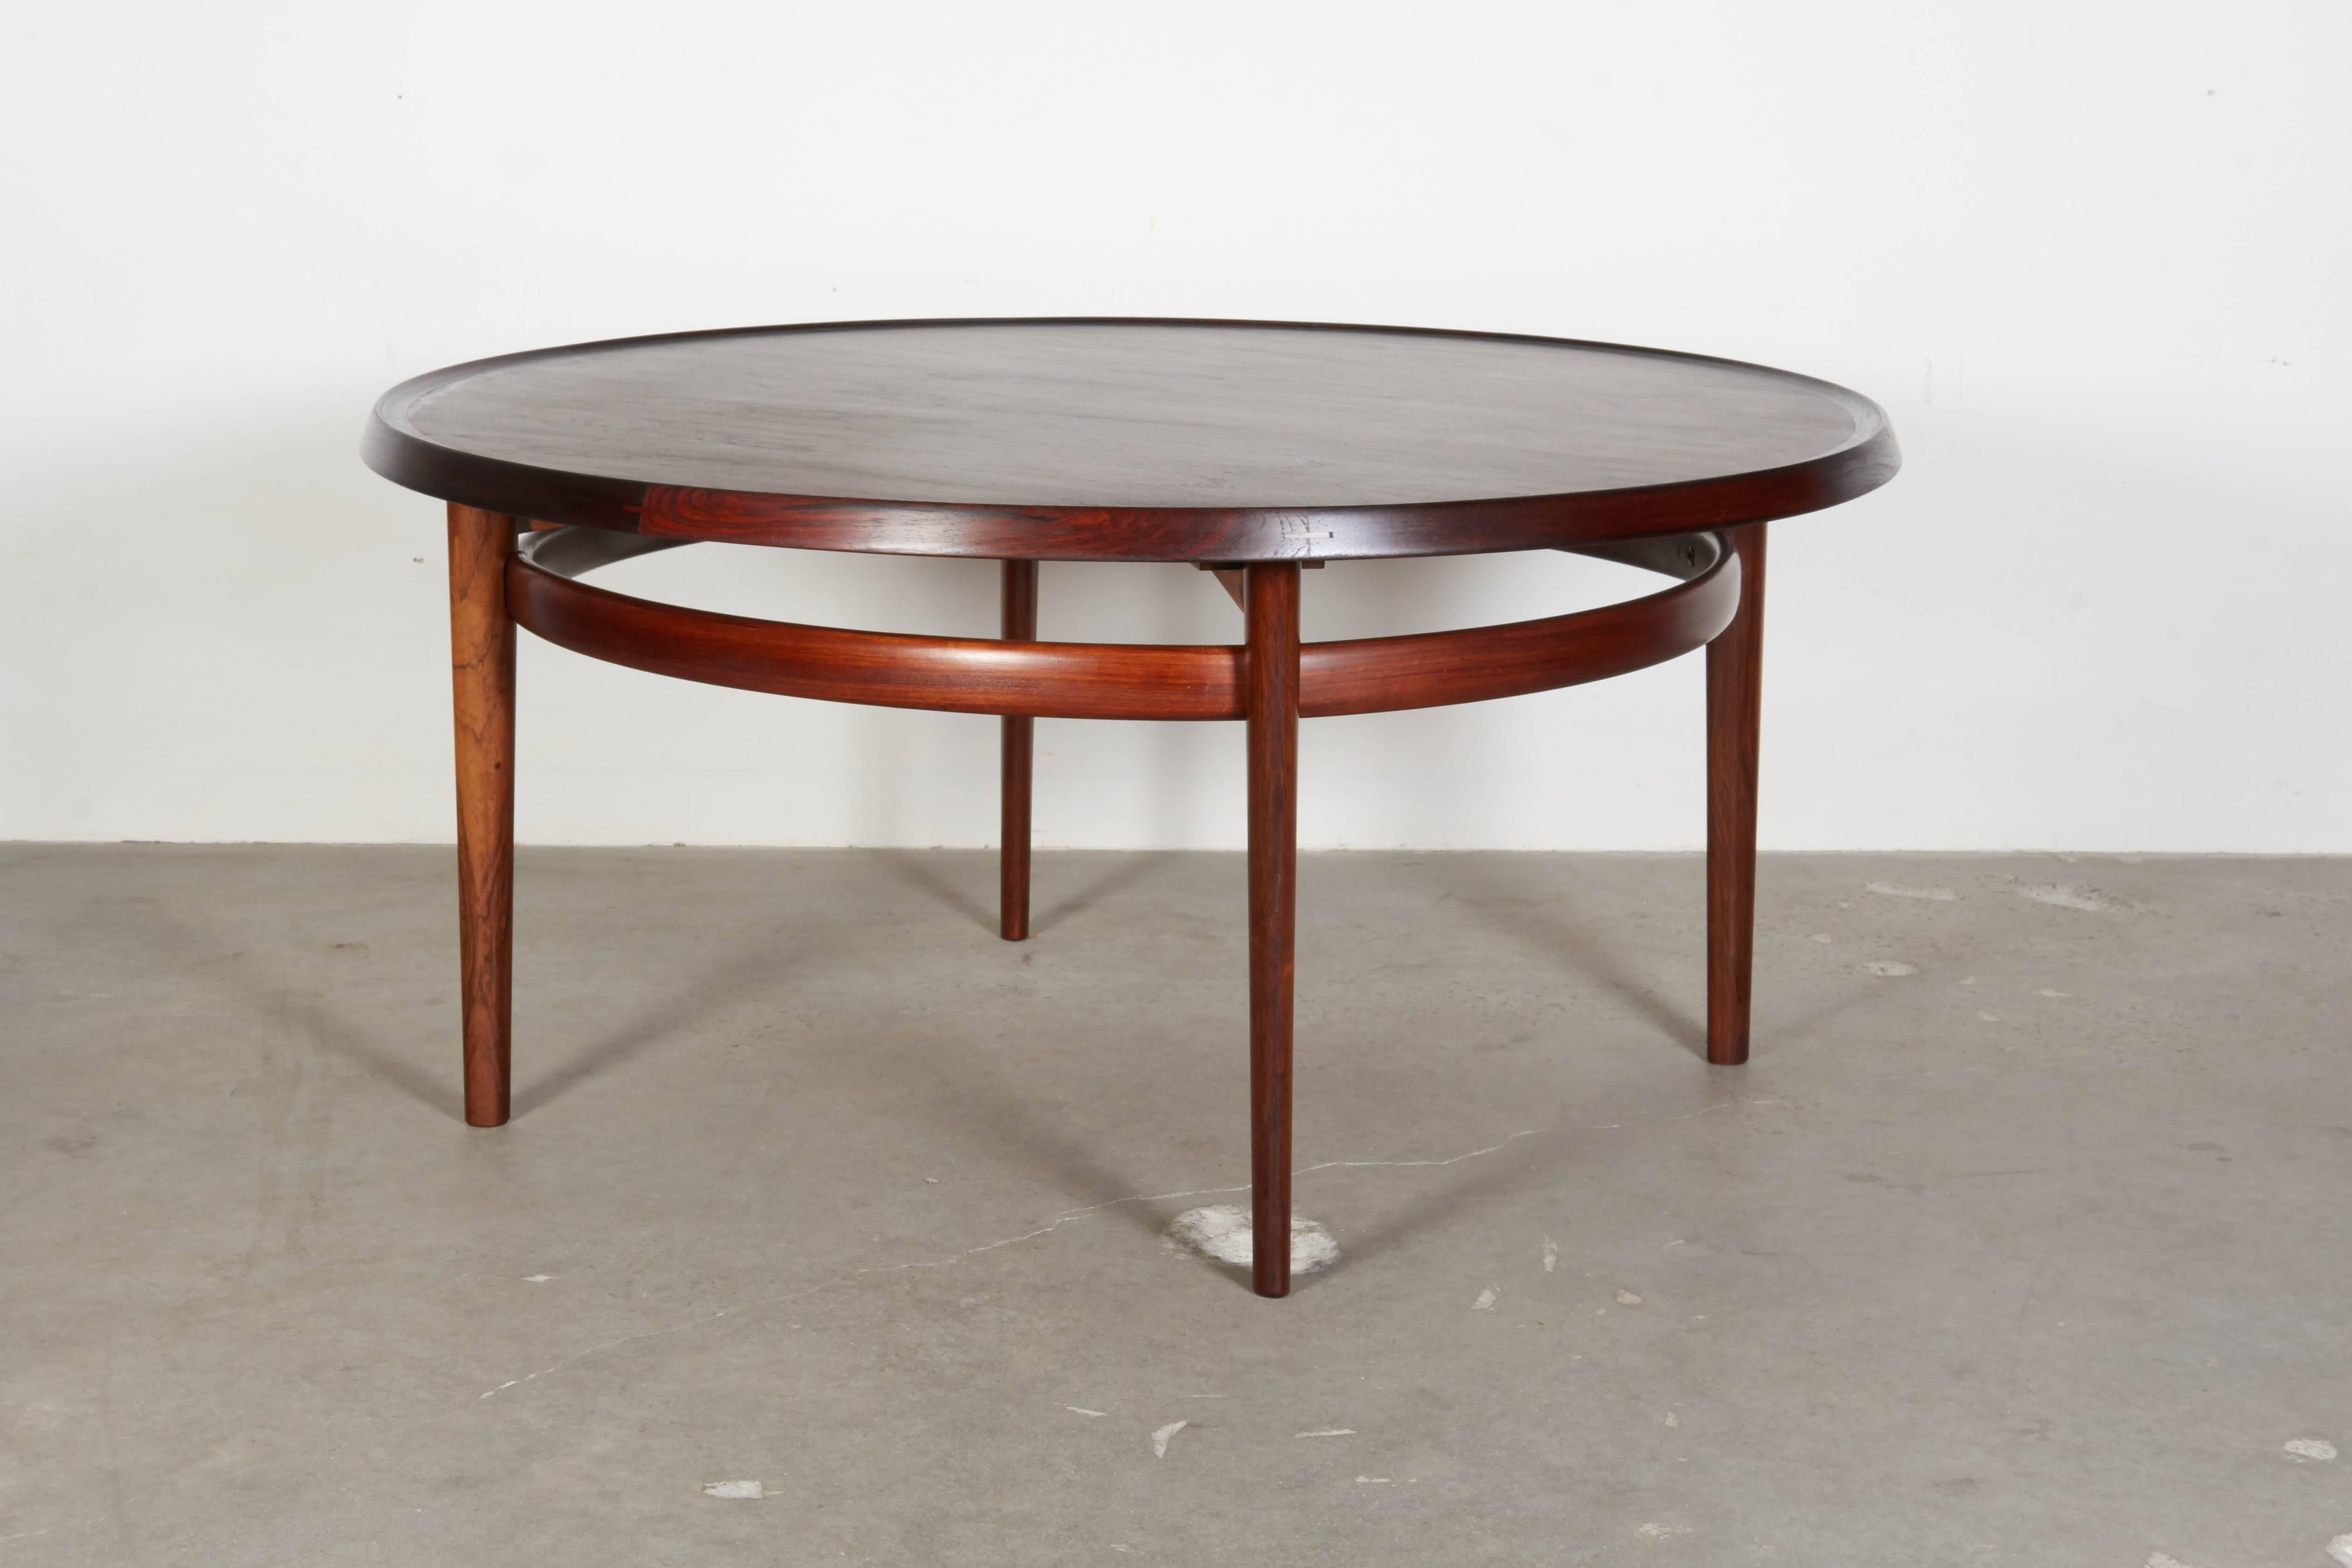 Vintage 1960s Round Rosewood Coffee Table by Torbjørn Afdal

This Norwegian coffee table is lovely and is generally in excellent condition. In picture number six you can see a small blemish along the inner lip of the table. The blemish isn't bad.